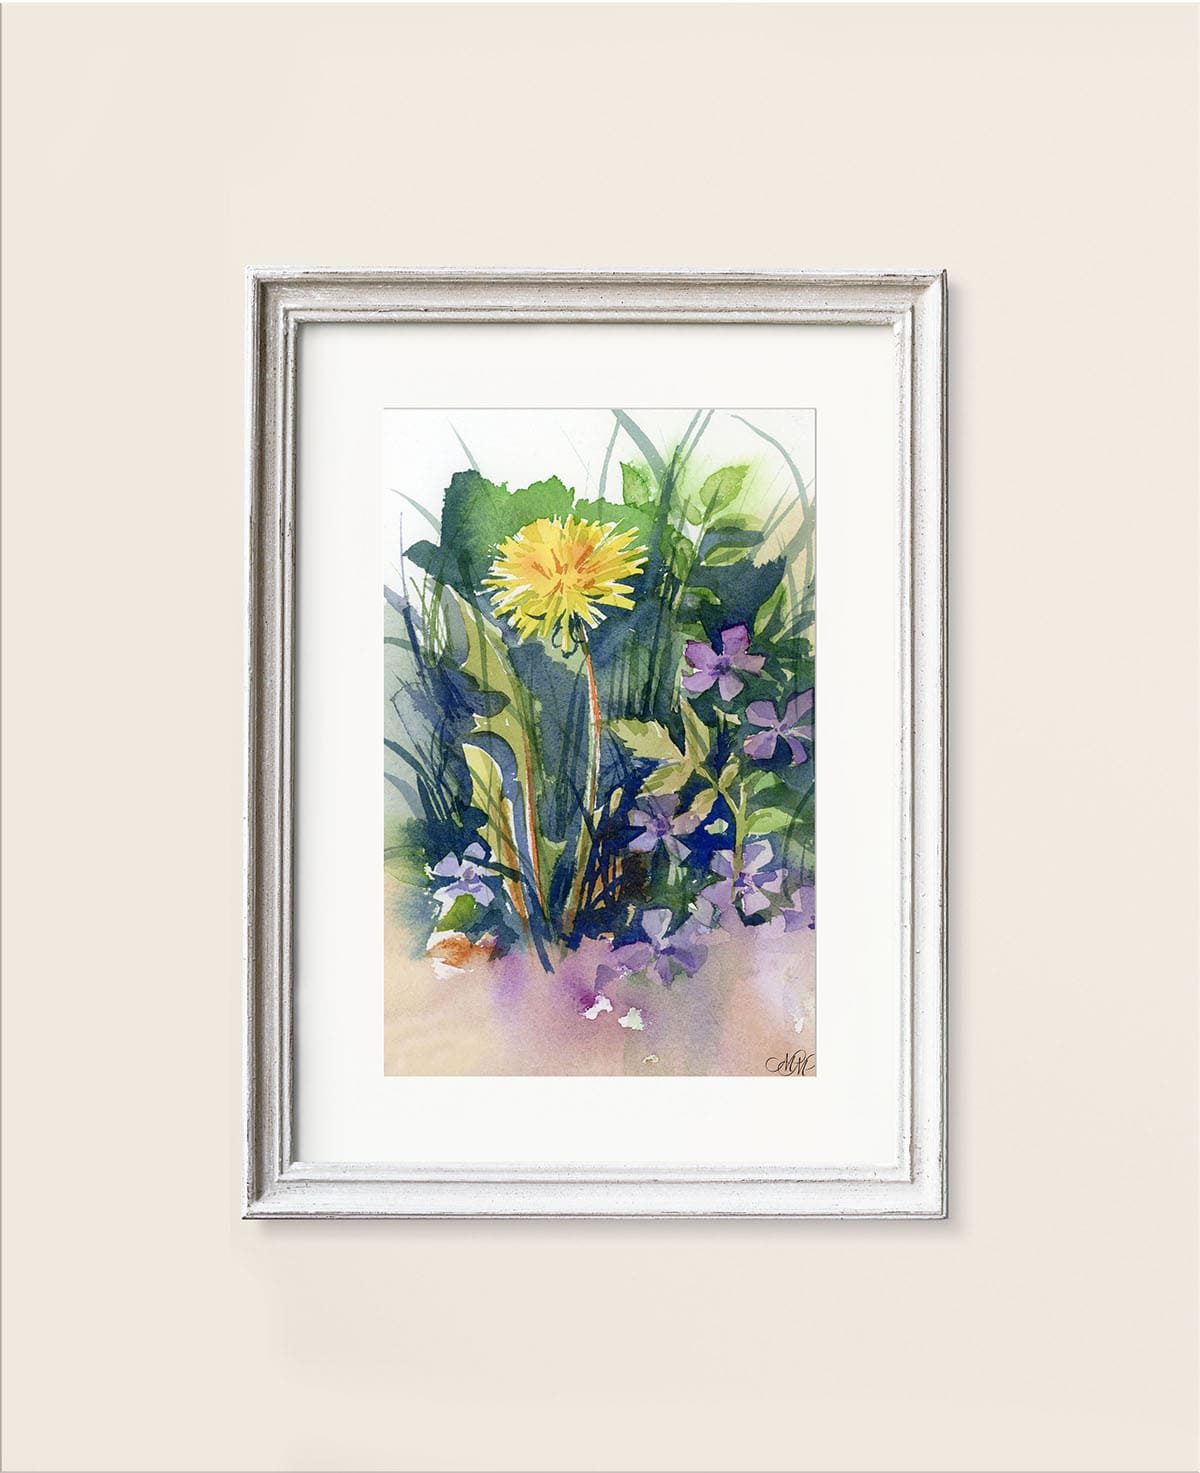 Framed watercolor Dandelion and wildflowers